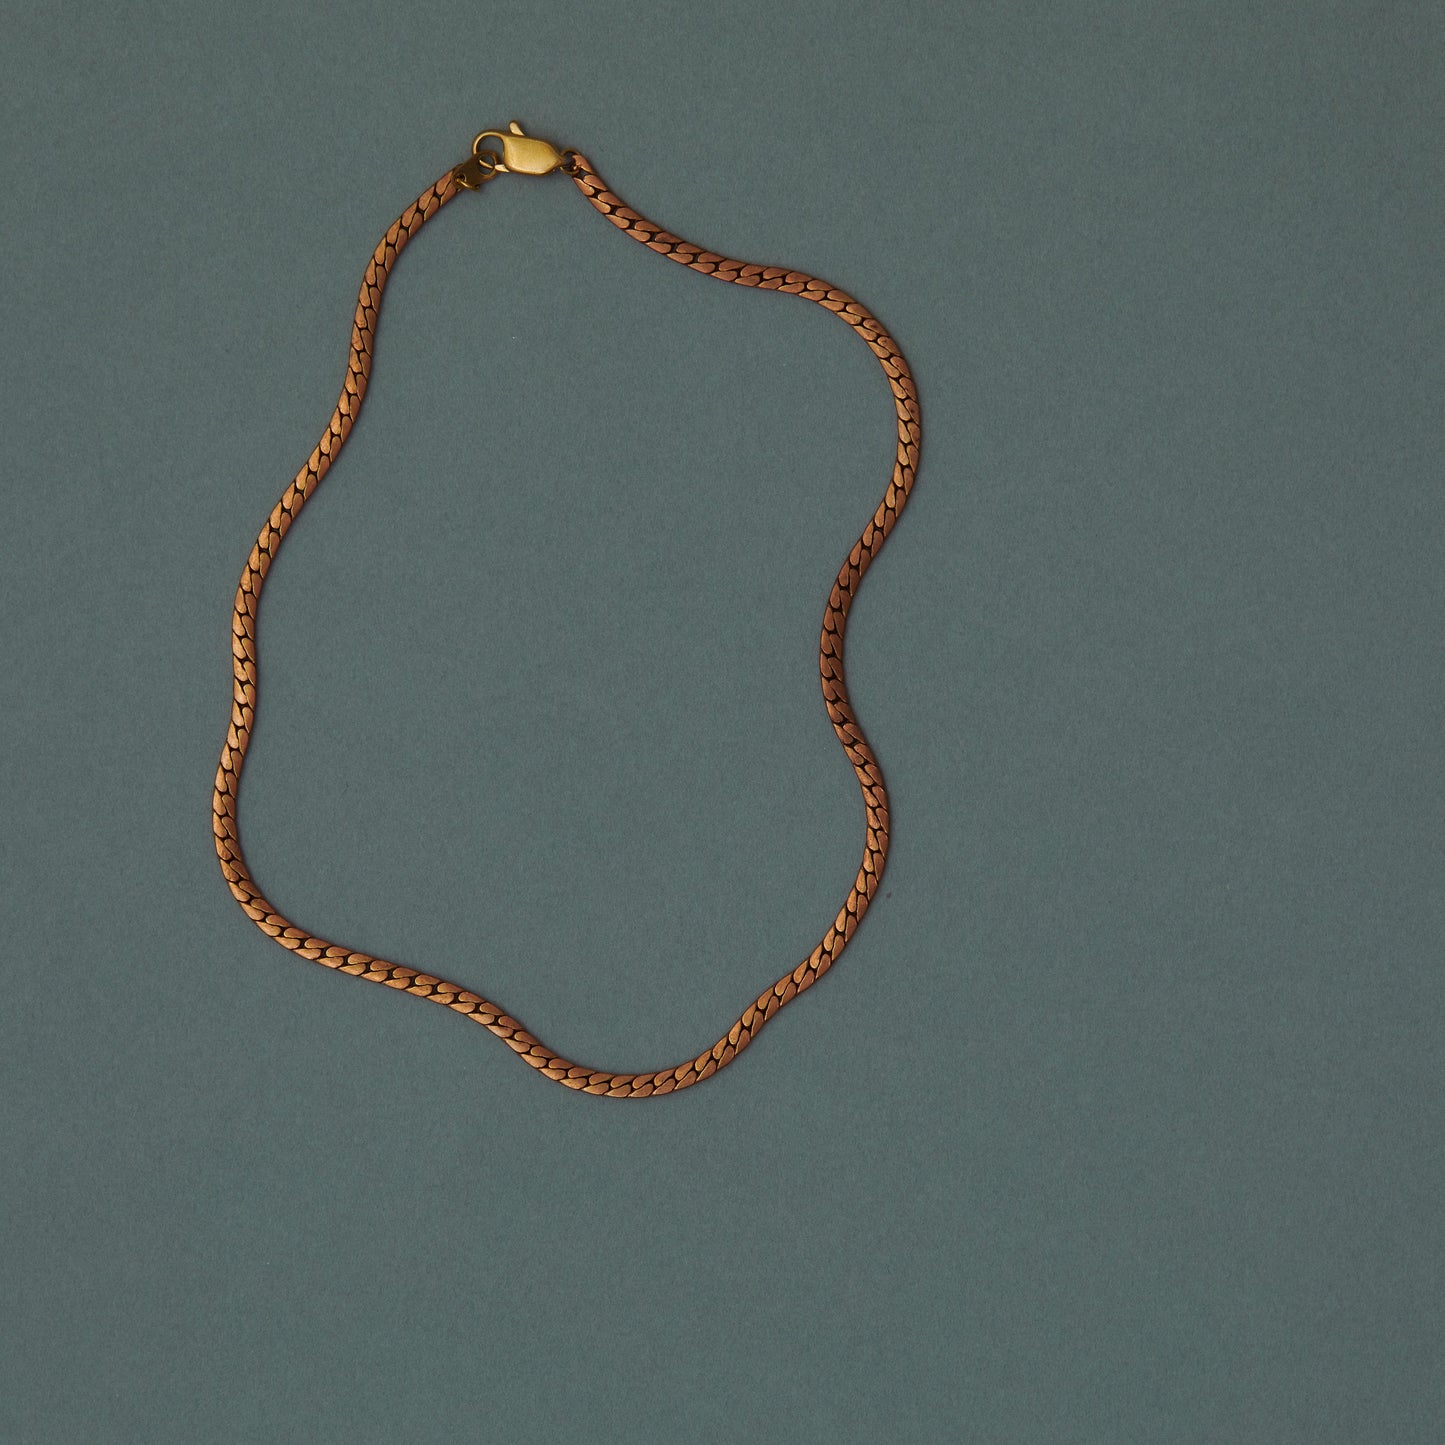 48 Vintage Flat Woven Snake Chain Necklace